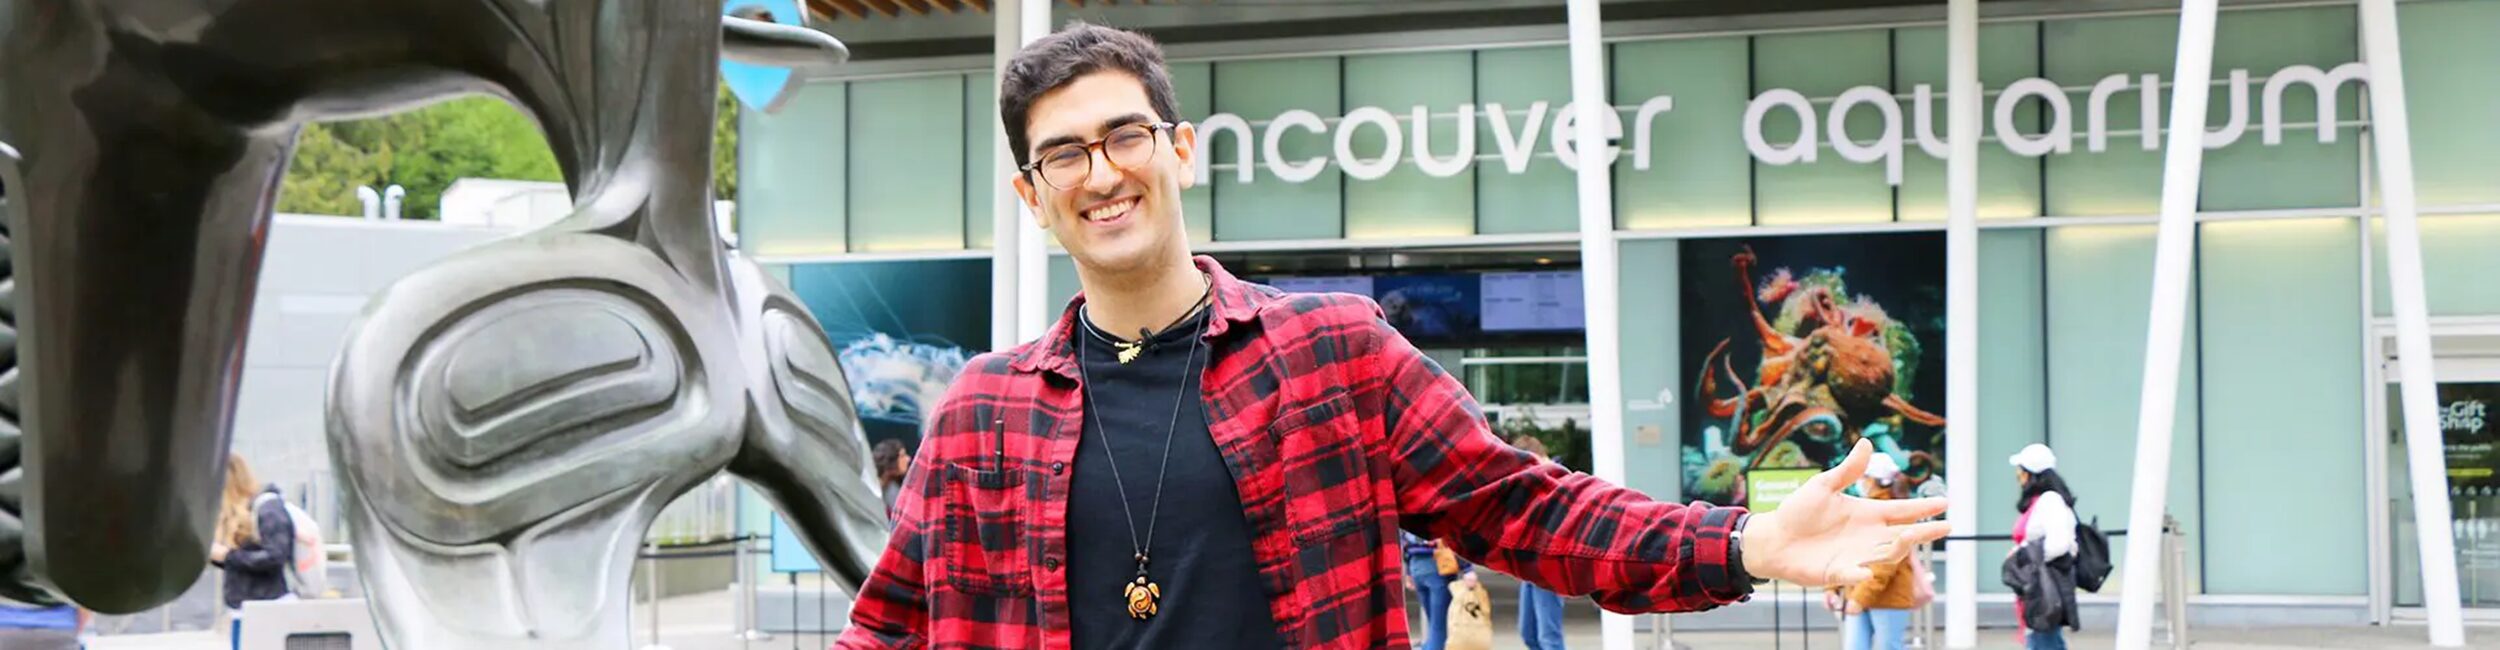 Alexander College Student Gabriel poses in front of the Vancouver Aquarium